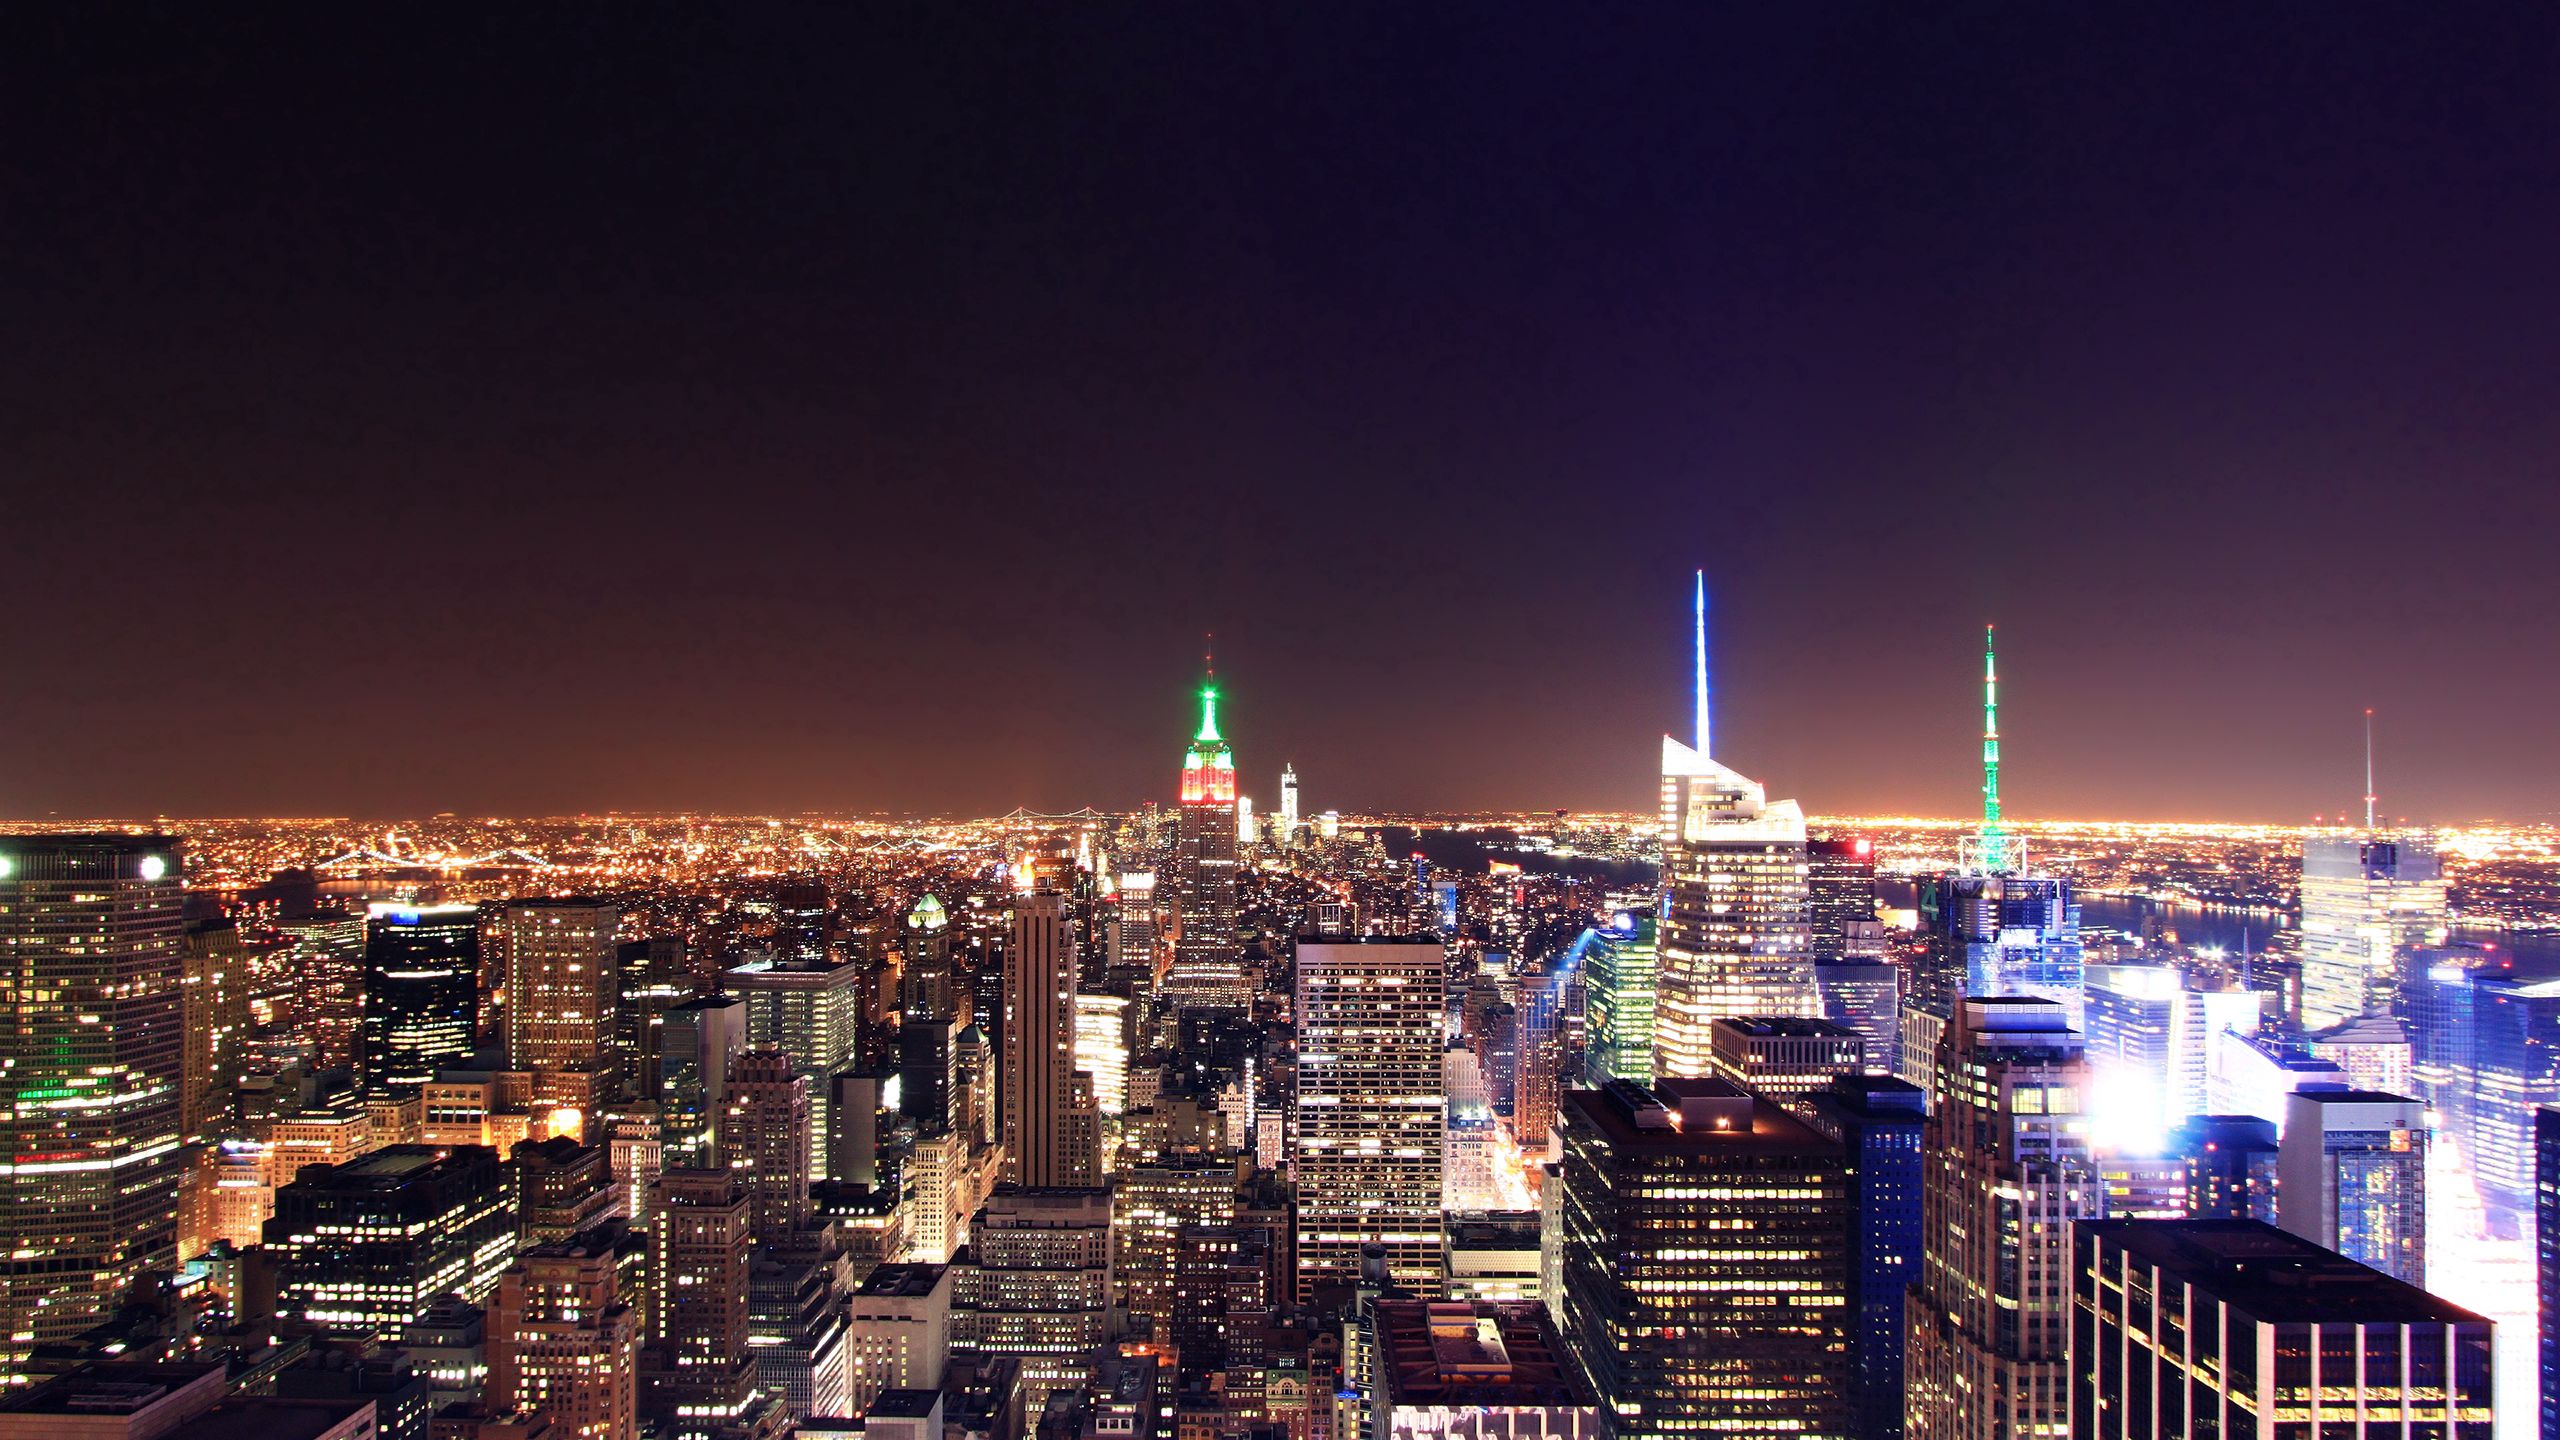 Download Wallpaper 2560x1440 New York City Top View Widescreen 169 Hd Background 6957